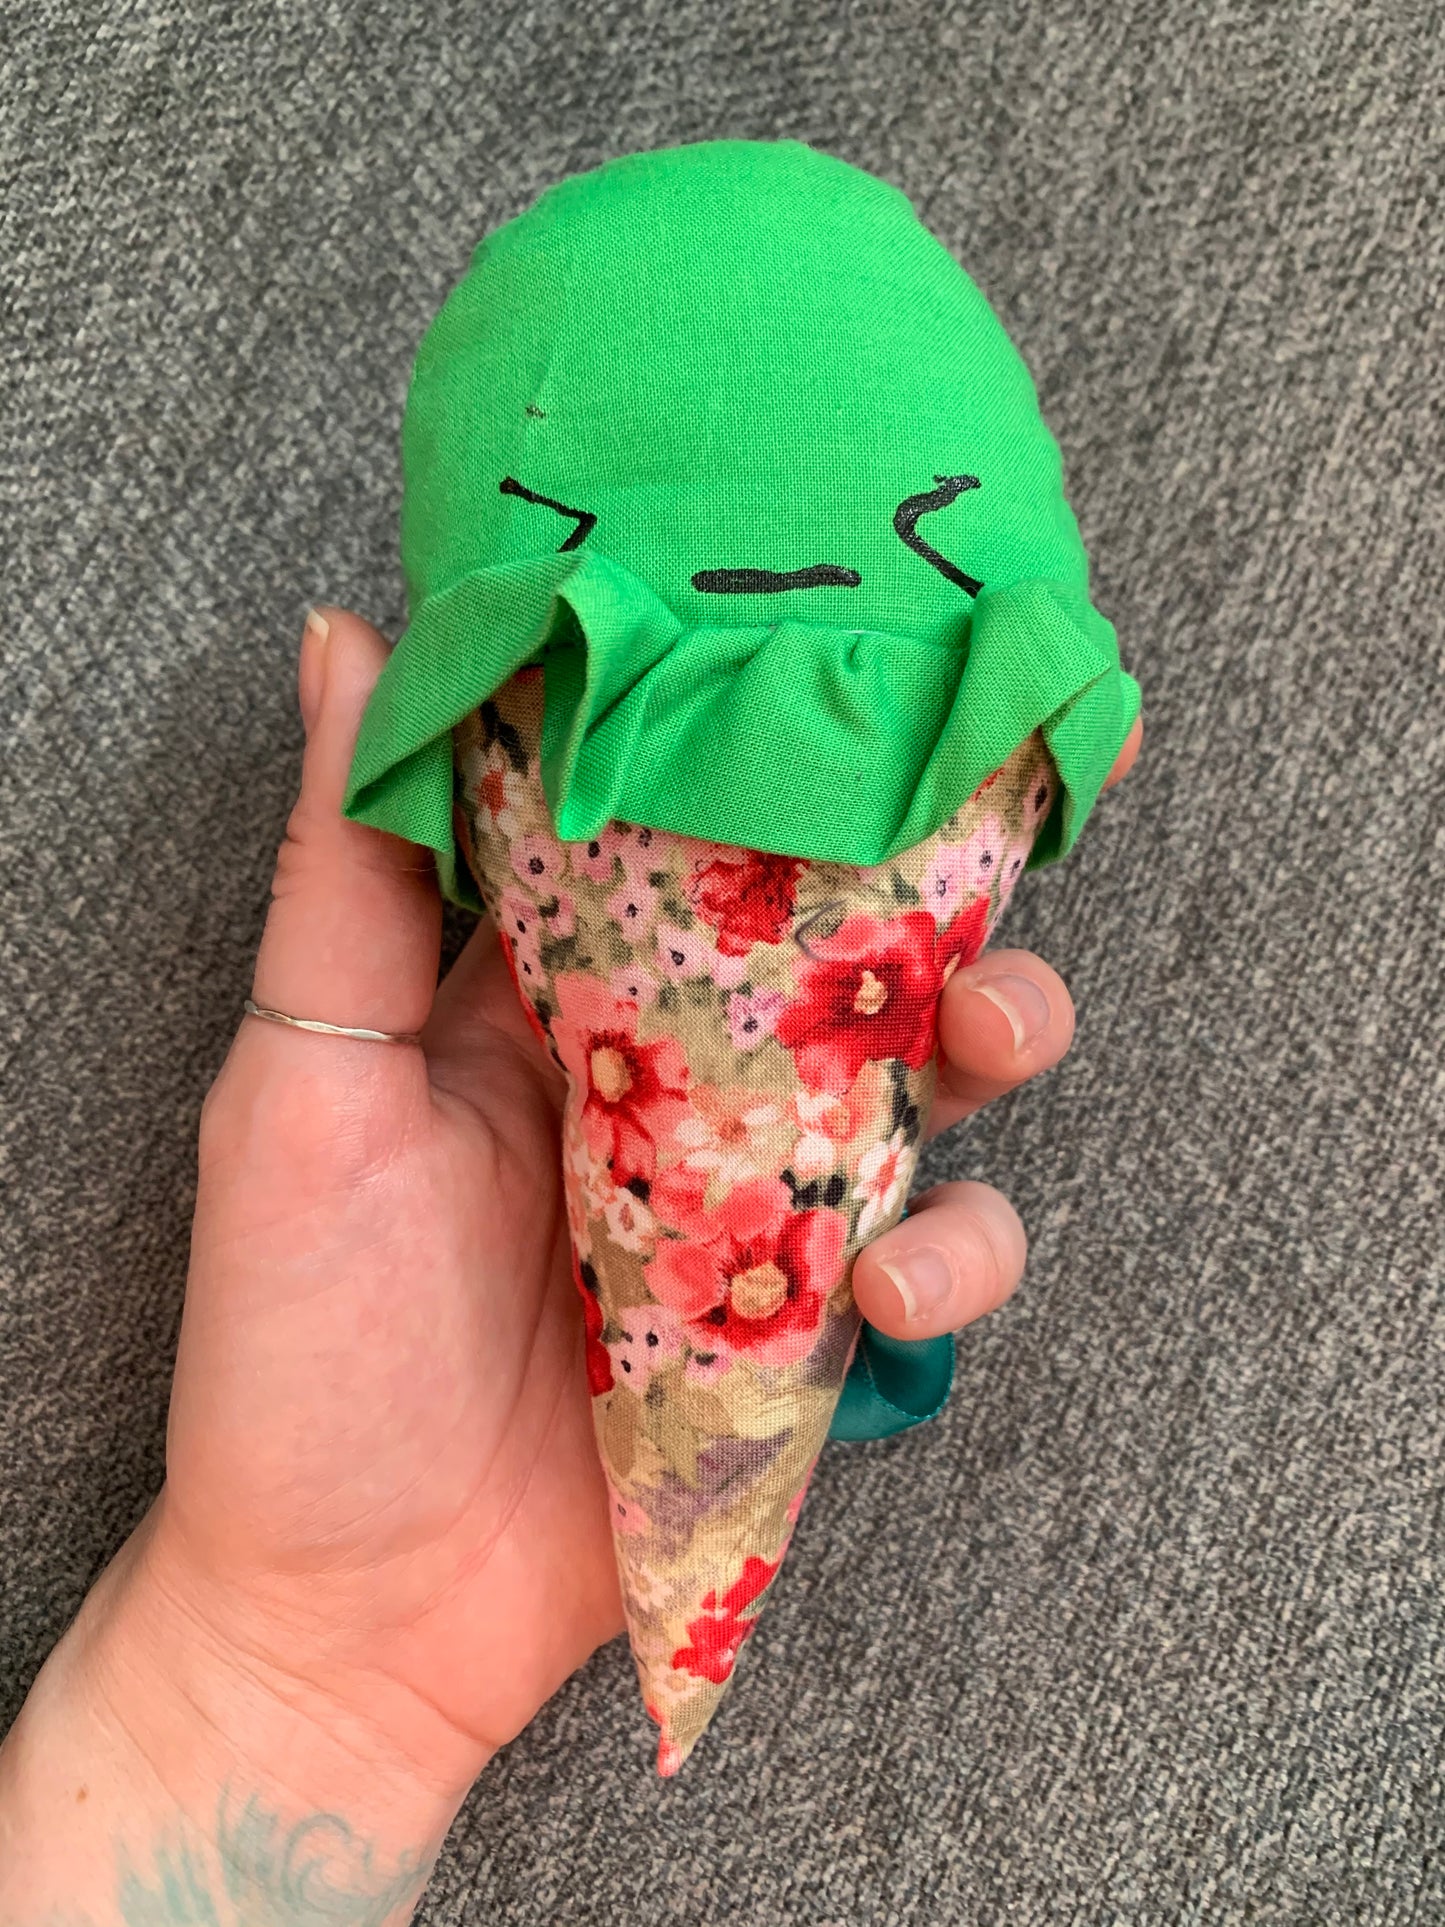 a green ice cream cone with pink and red floral cone, held up against a grey background, hand for scale